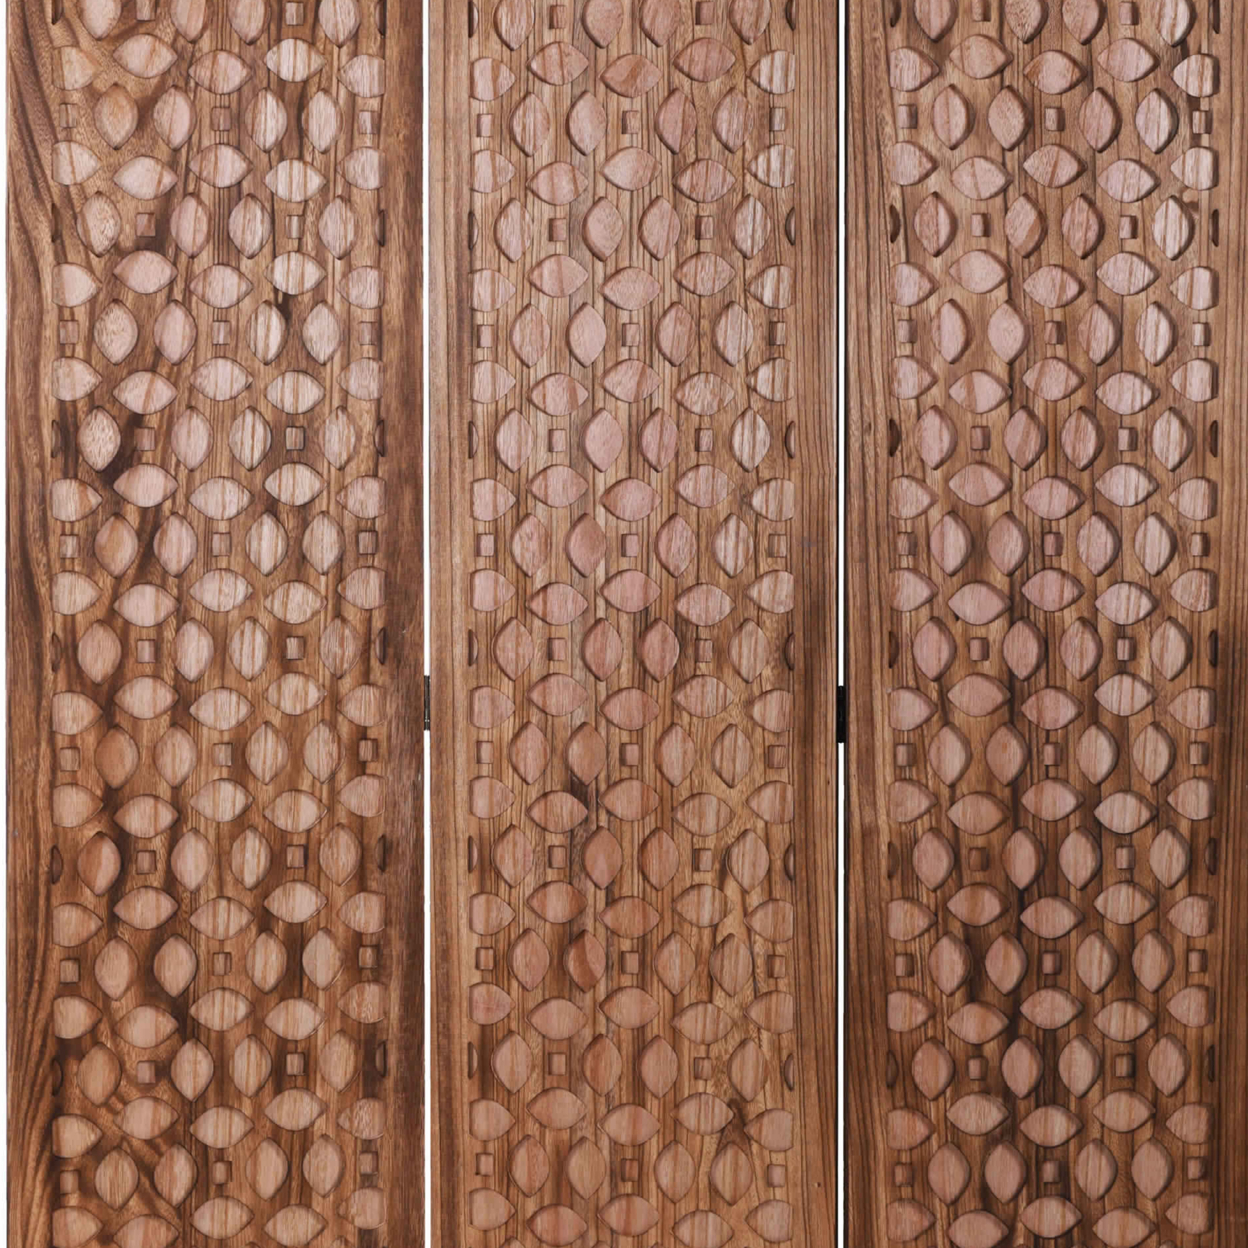 3 Panel Transitional Wooden Screen With Leaf Like Carvings, Brown- Saltoro Sherpi